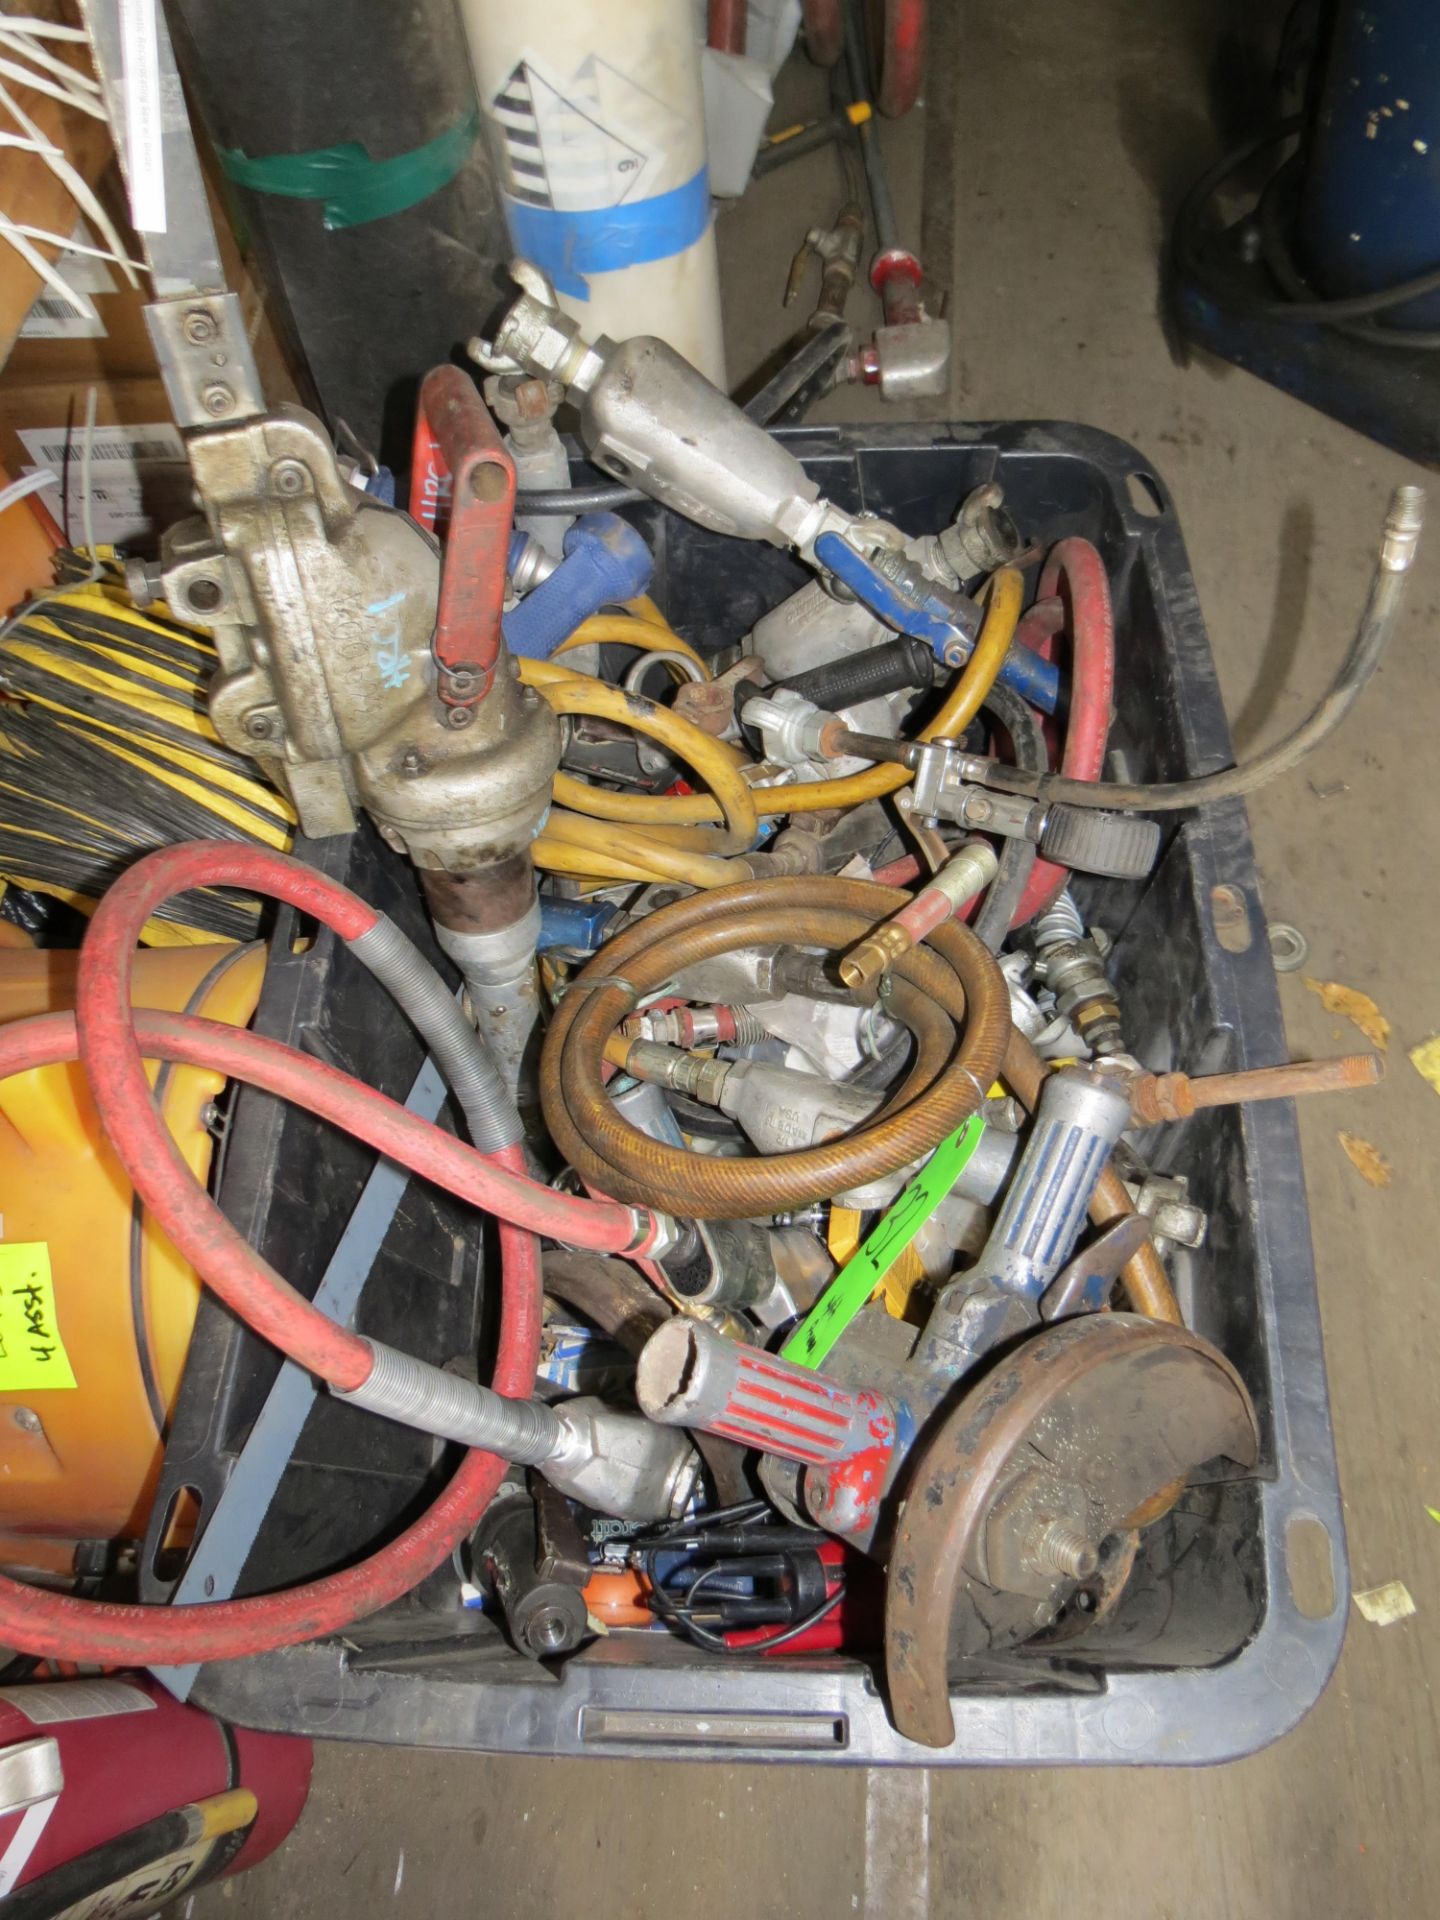 LOT ASSORTED PNEUMATIC TOOLS IN BLACK PLASTIC BIN, AIR HAMMERS, IMPACT WRENCHES, PRESSURE GAUGES, - Image 3 of 3